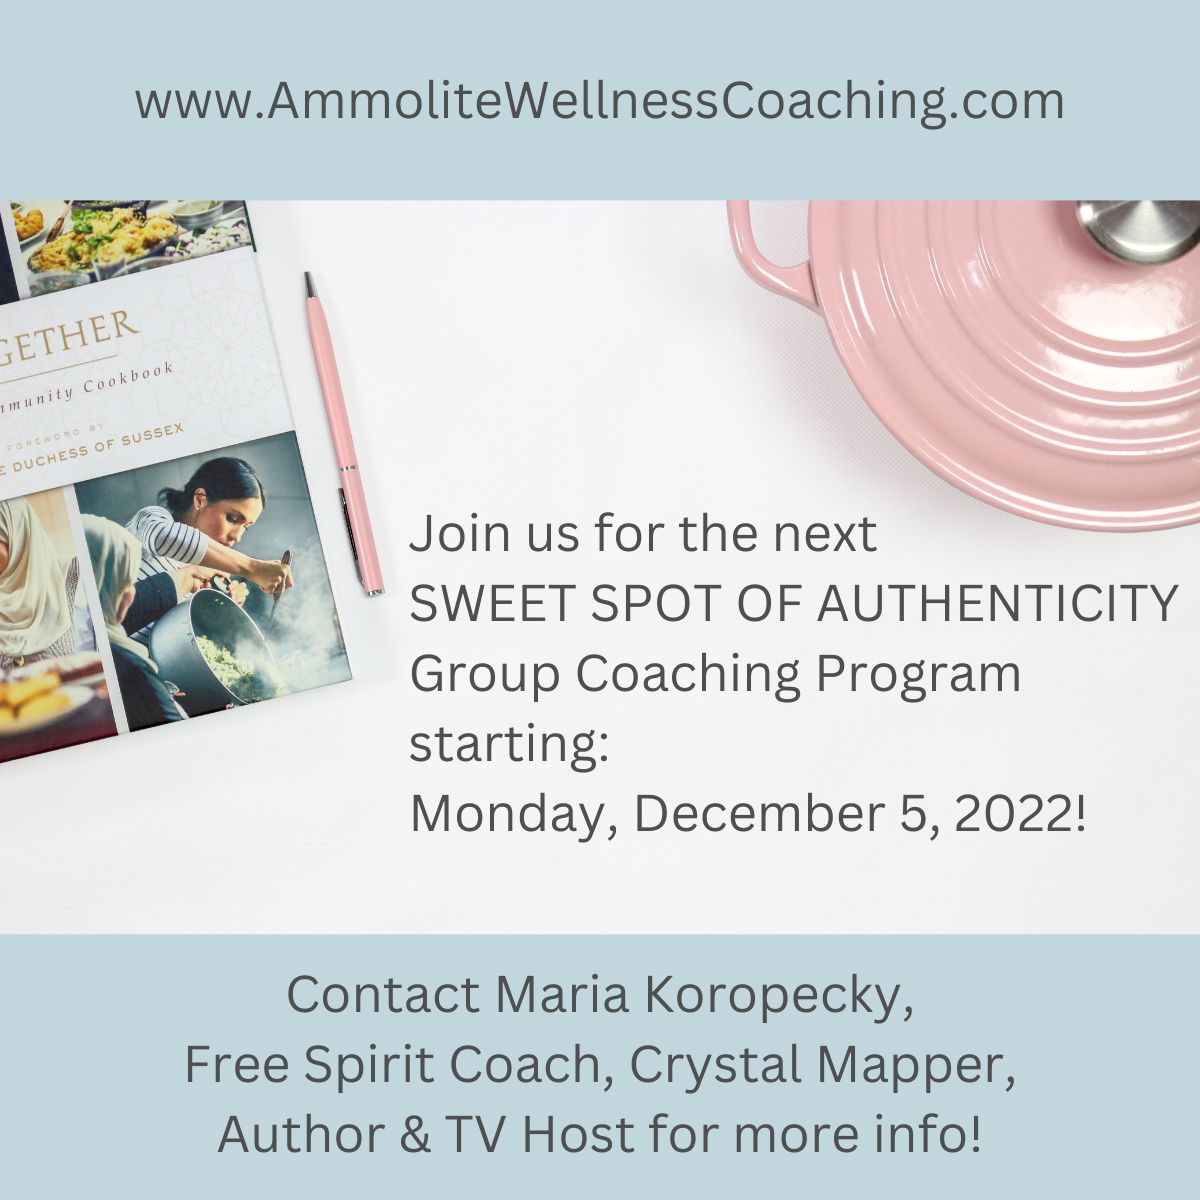 Join Us for the Next Group Coaching Program!